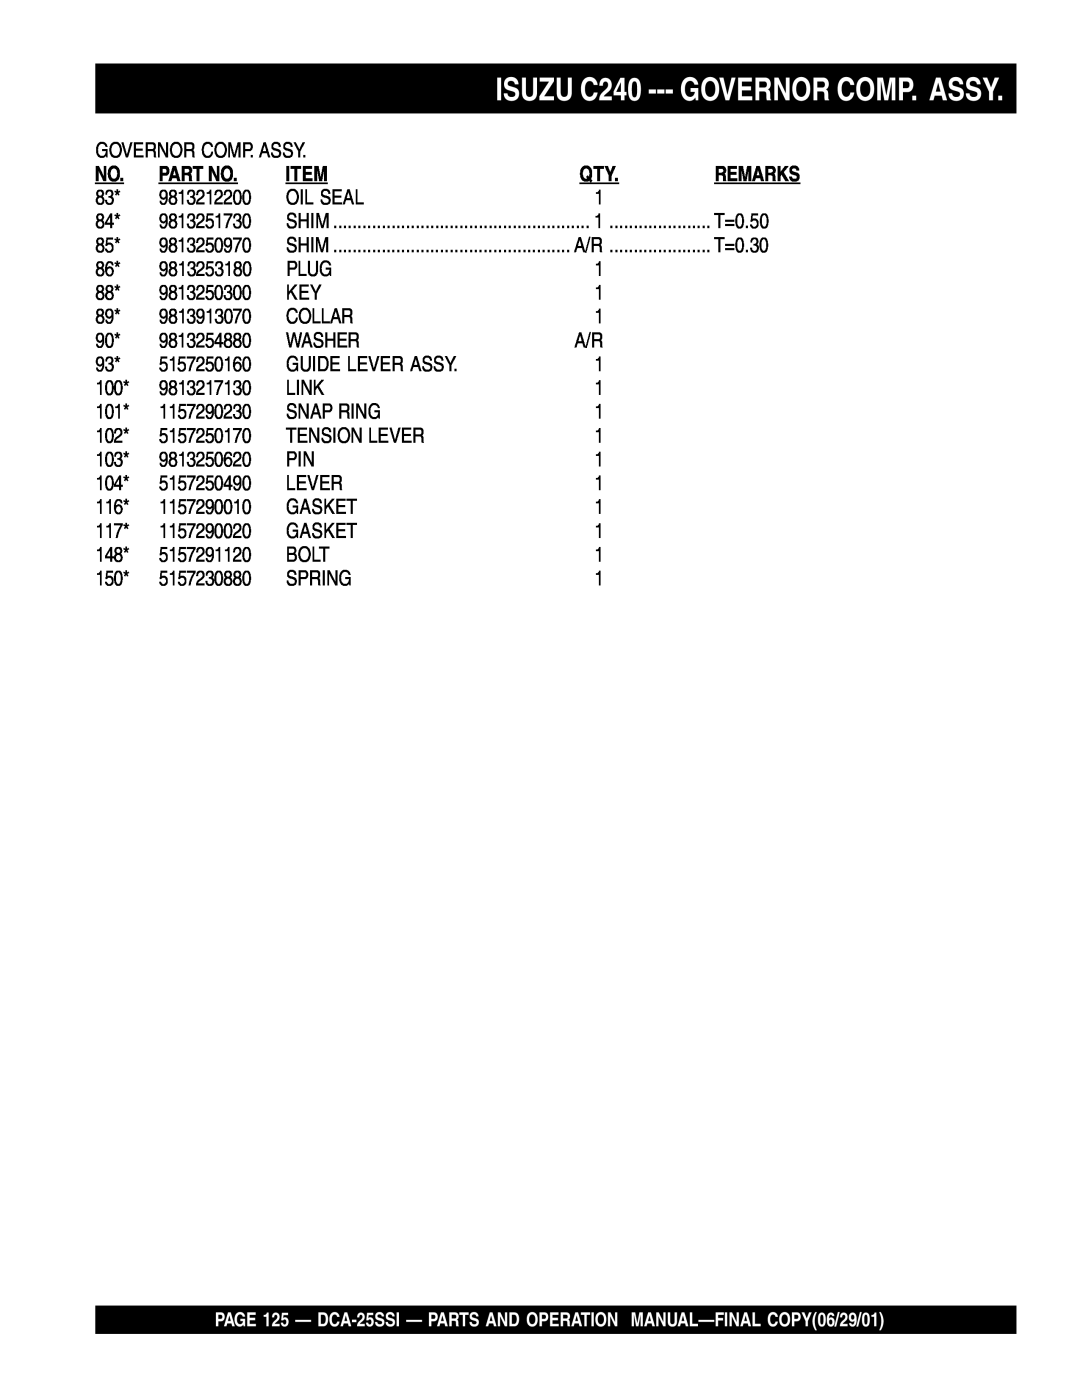 Multiquip DCA-25SSI operation manual Governor Comp. Assy, ISUZUC240, Part No, Item, Remarks 